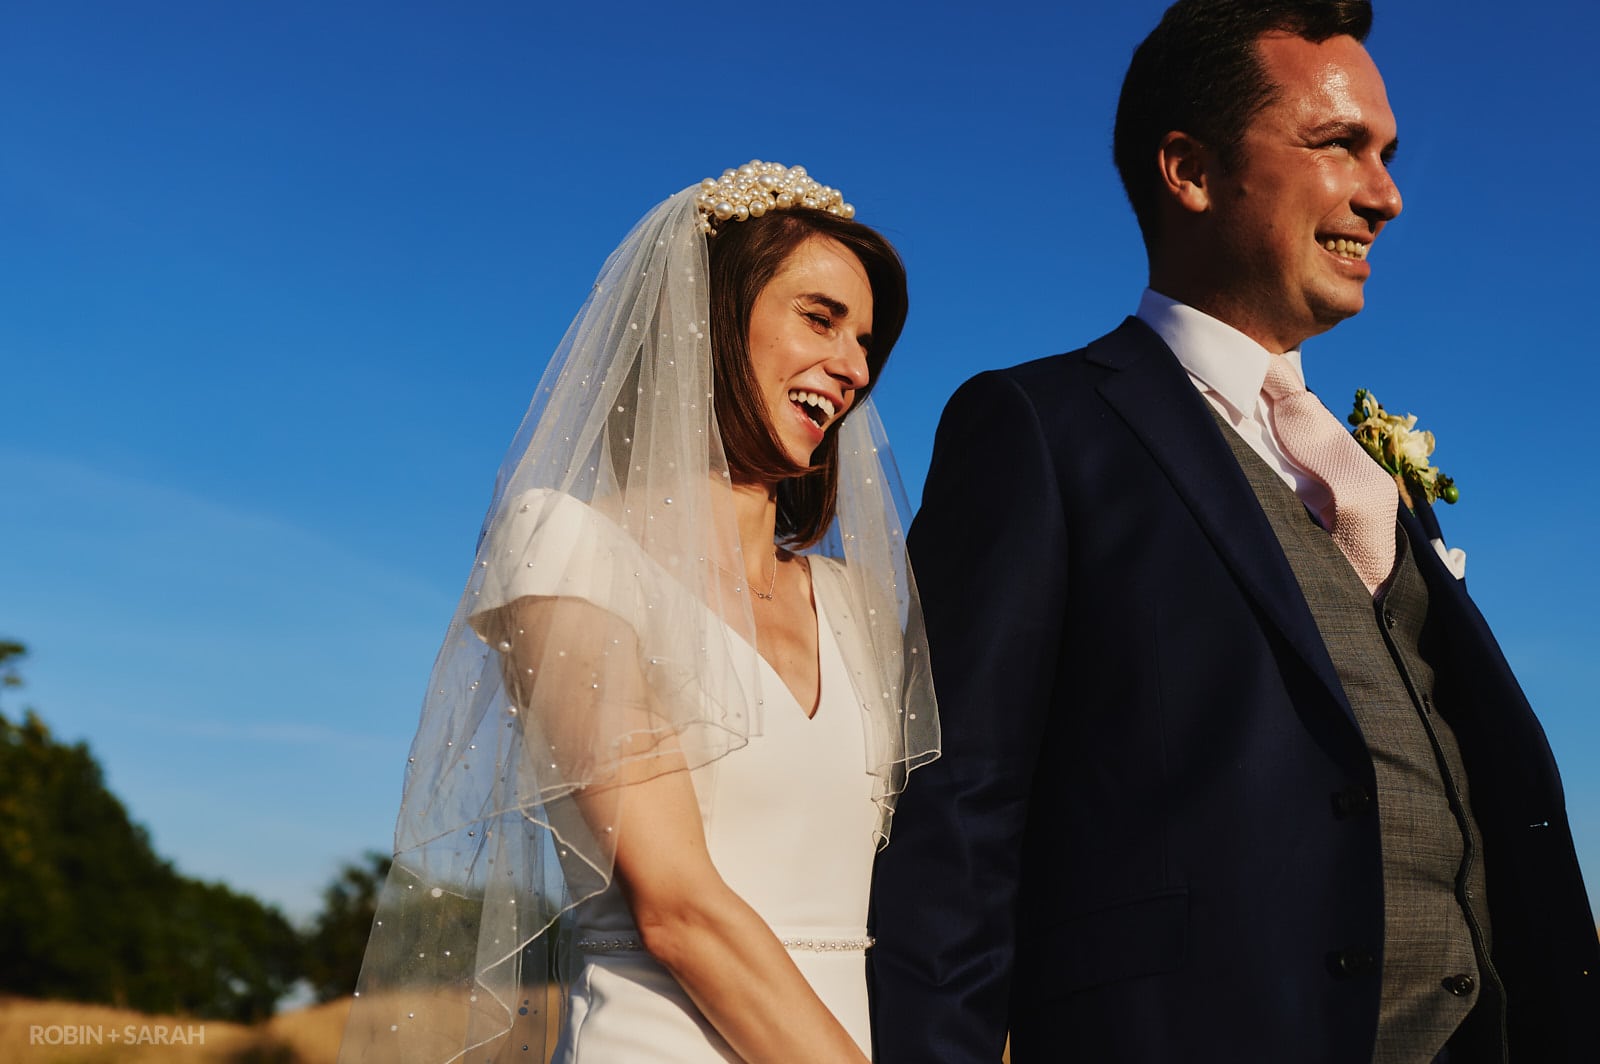 Bride and groom laughing together as they walk through fields